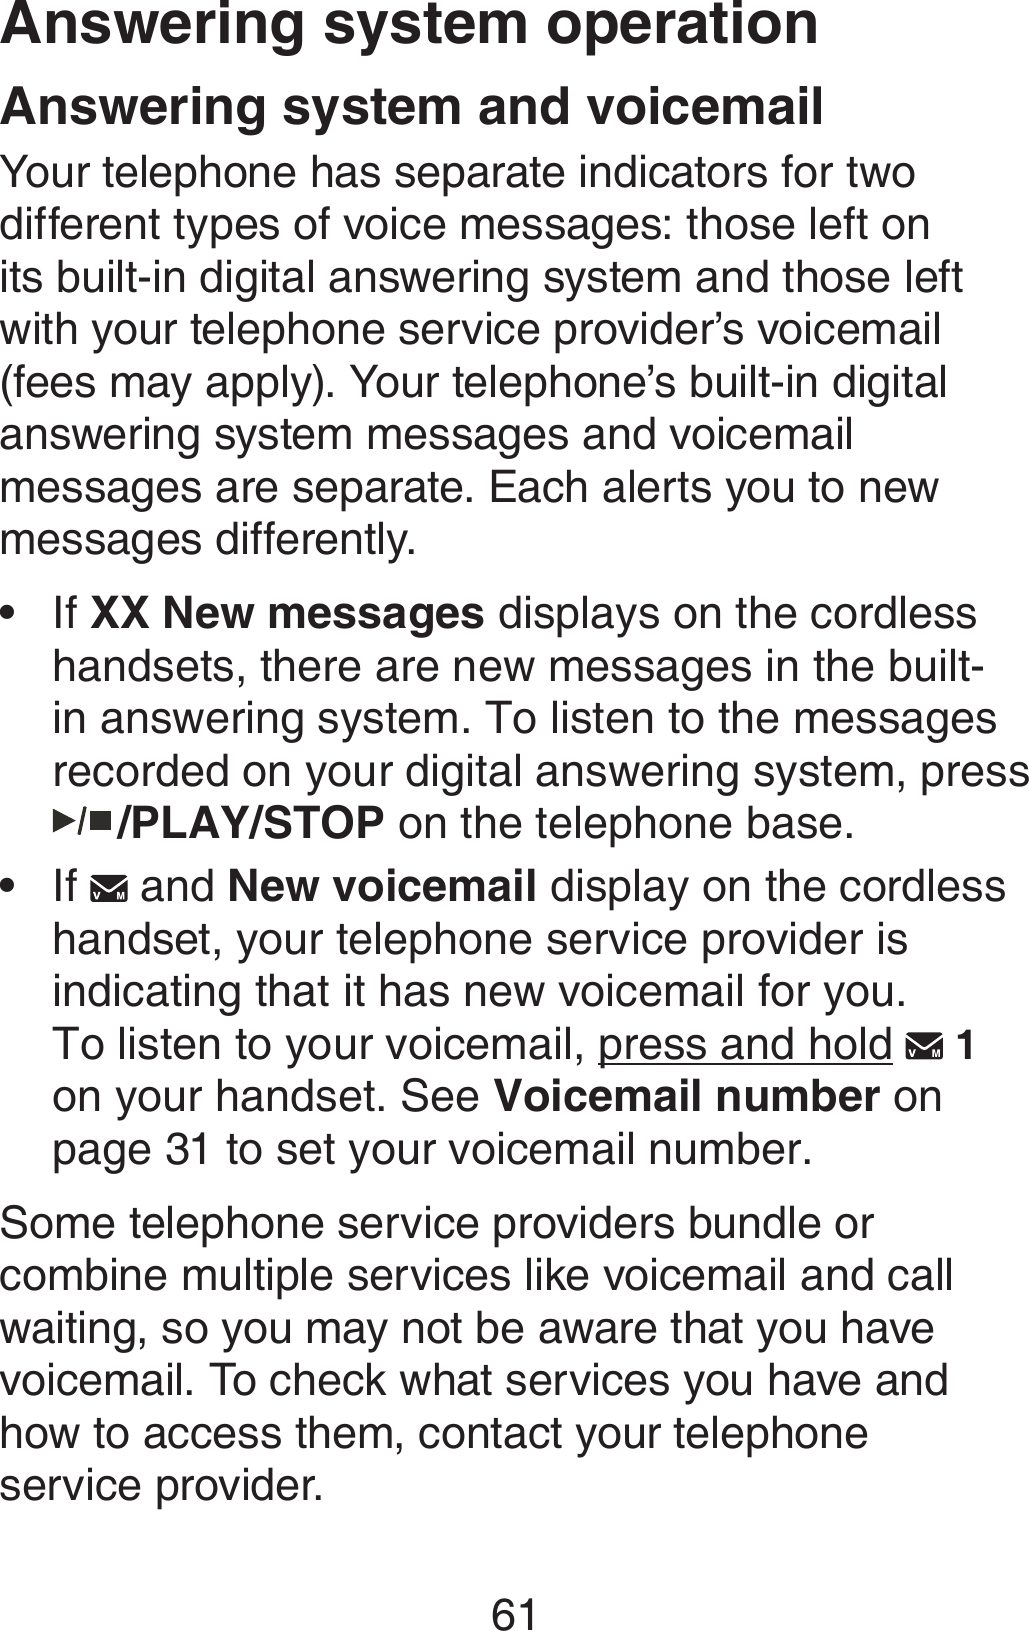 61Answering system and voicemailYour telephone has separate indicators for two different types of voice messages: those left on its built-in digital answering system and those left with your telephone service provider’s voicemail (fees may apply). Your telephone’s built-in digital answering system messages and voicemail messages are separate. Each alerts you to new messages differently. If XX New messages displays on the cordless handsets, there are new messages in the built-in answering system. To listen to the messages recorded on your digital answering system, press   /PLAY/STOP on the telephone base.If   and New voicemail display on the cordless handset, your telephone service provider is indicating that it has new voicemail for you.  To listen to your voicemail, press and hold   1  on your handset. See Voicemail number on page 31 to set your voicemail number.Some telephone service providers bundle or combine multiple services like voicemail and call waiting, so you may not be aware that you have voicemail. To check what services you have and how to access them, contact your telephone  service provider. ••Answering system operation